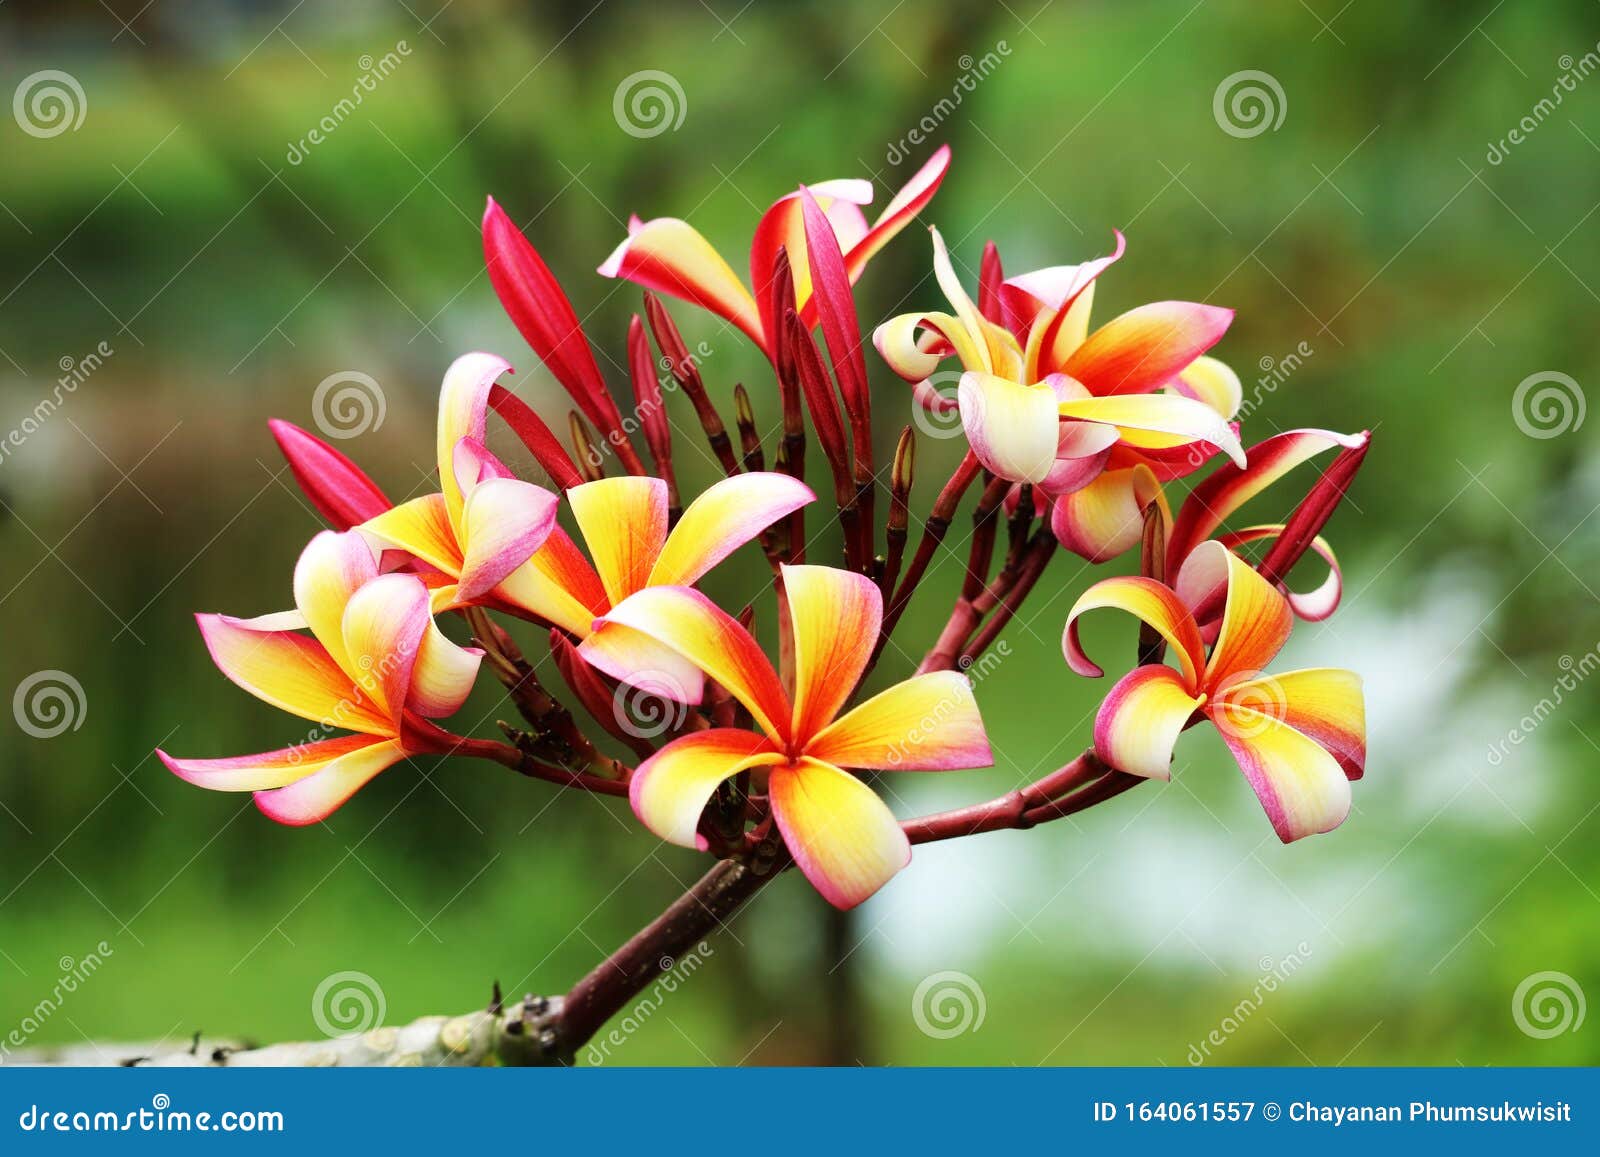 Plumeria Red White Orange Yellow Bouquet Flower Blooming in the Park ...